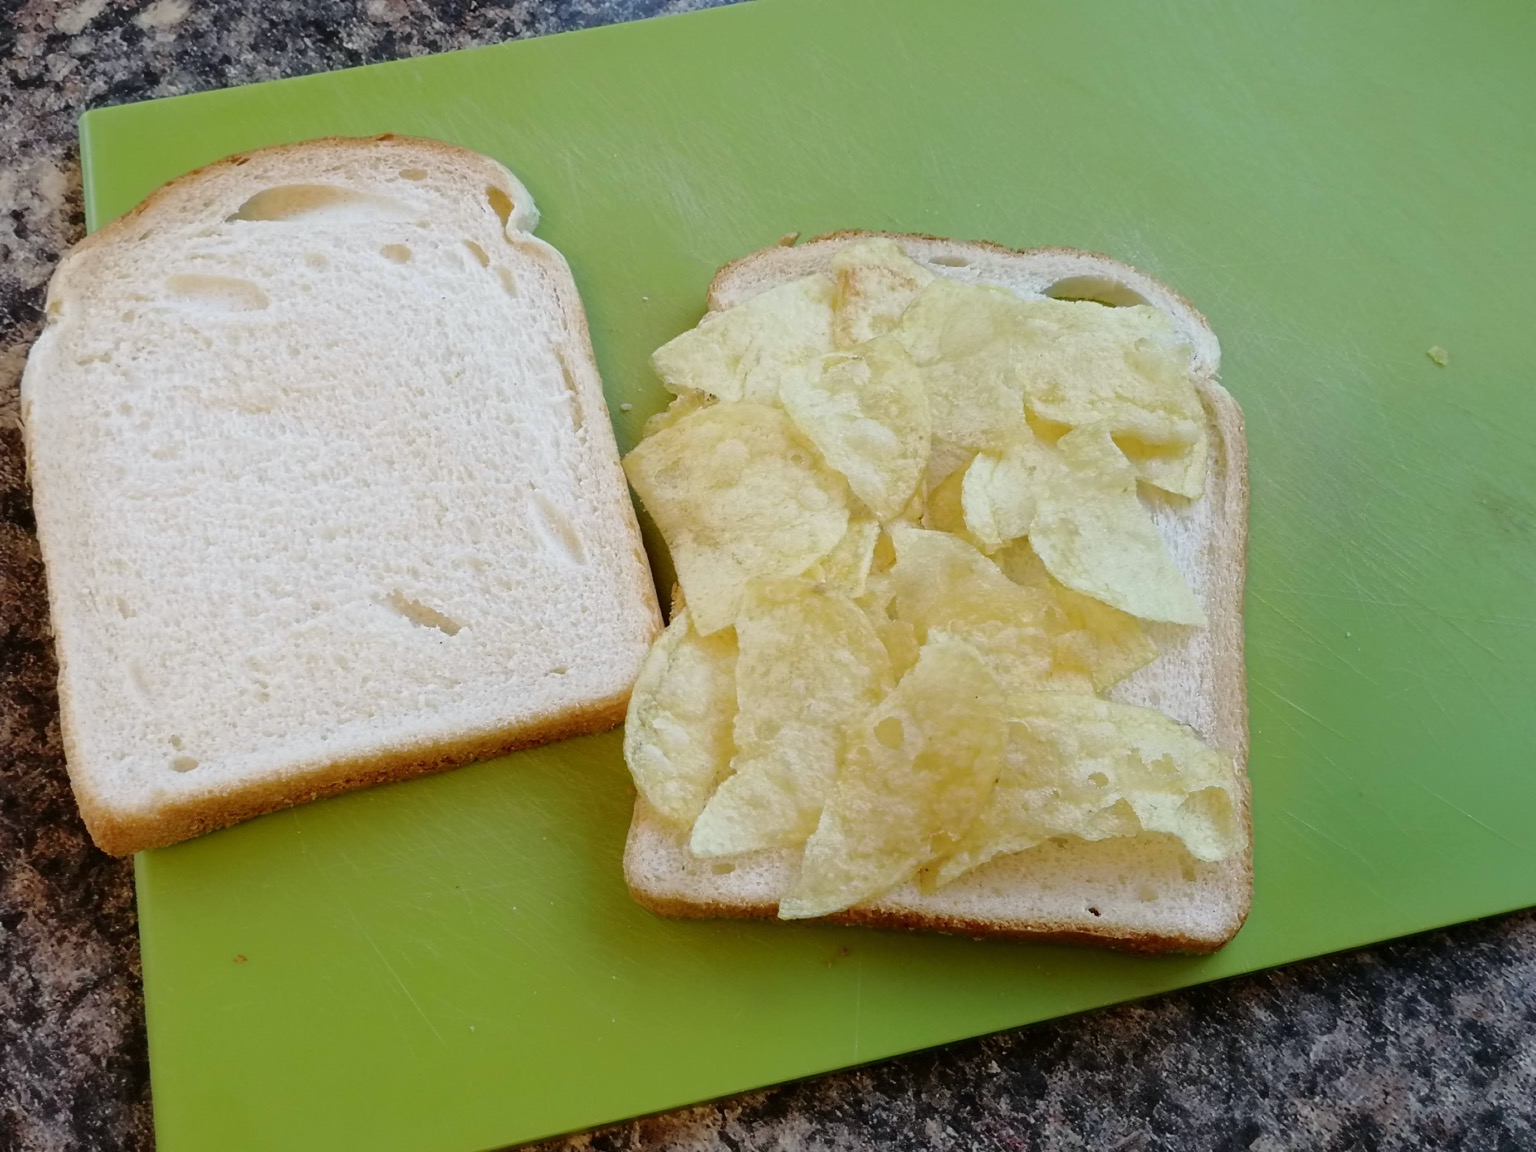 White crisp sandwich with lid off on a cutting board